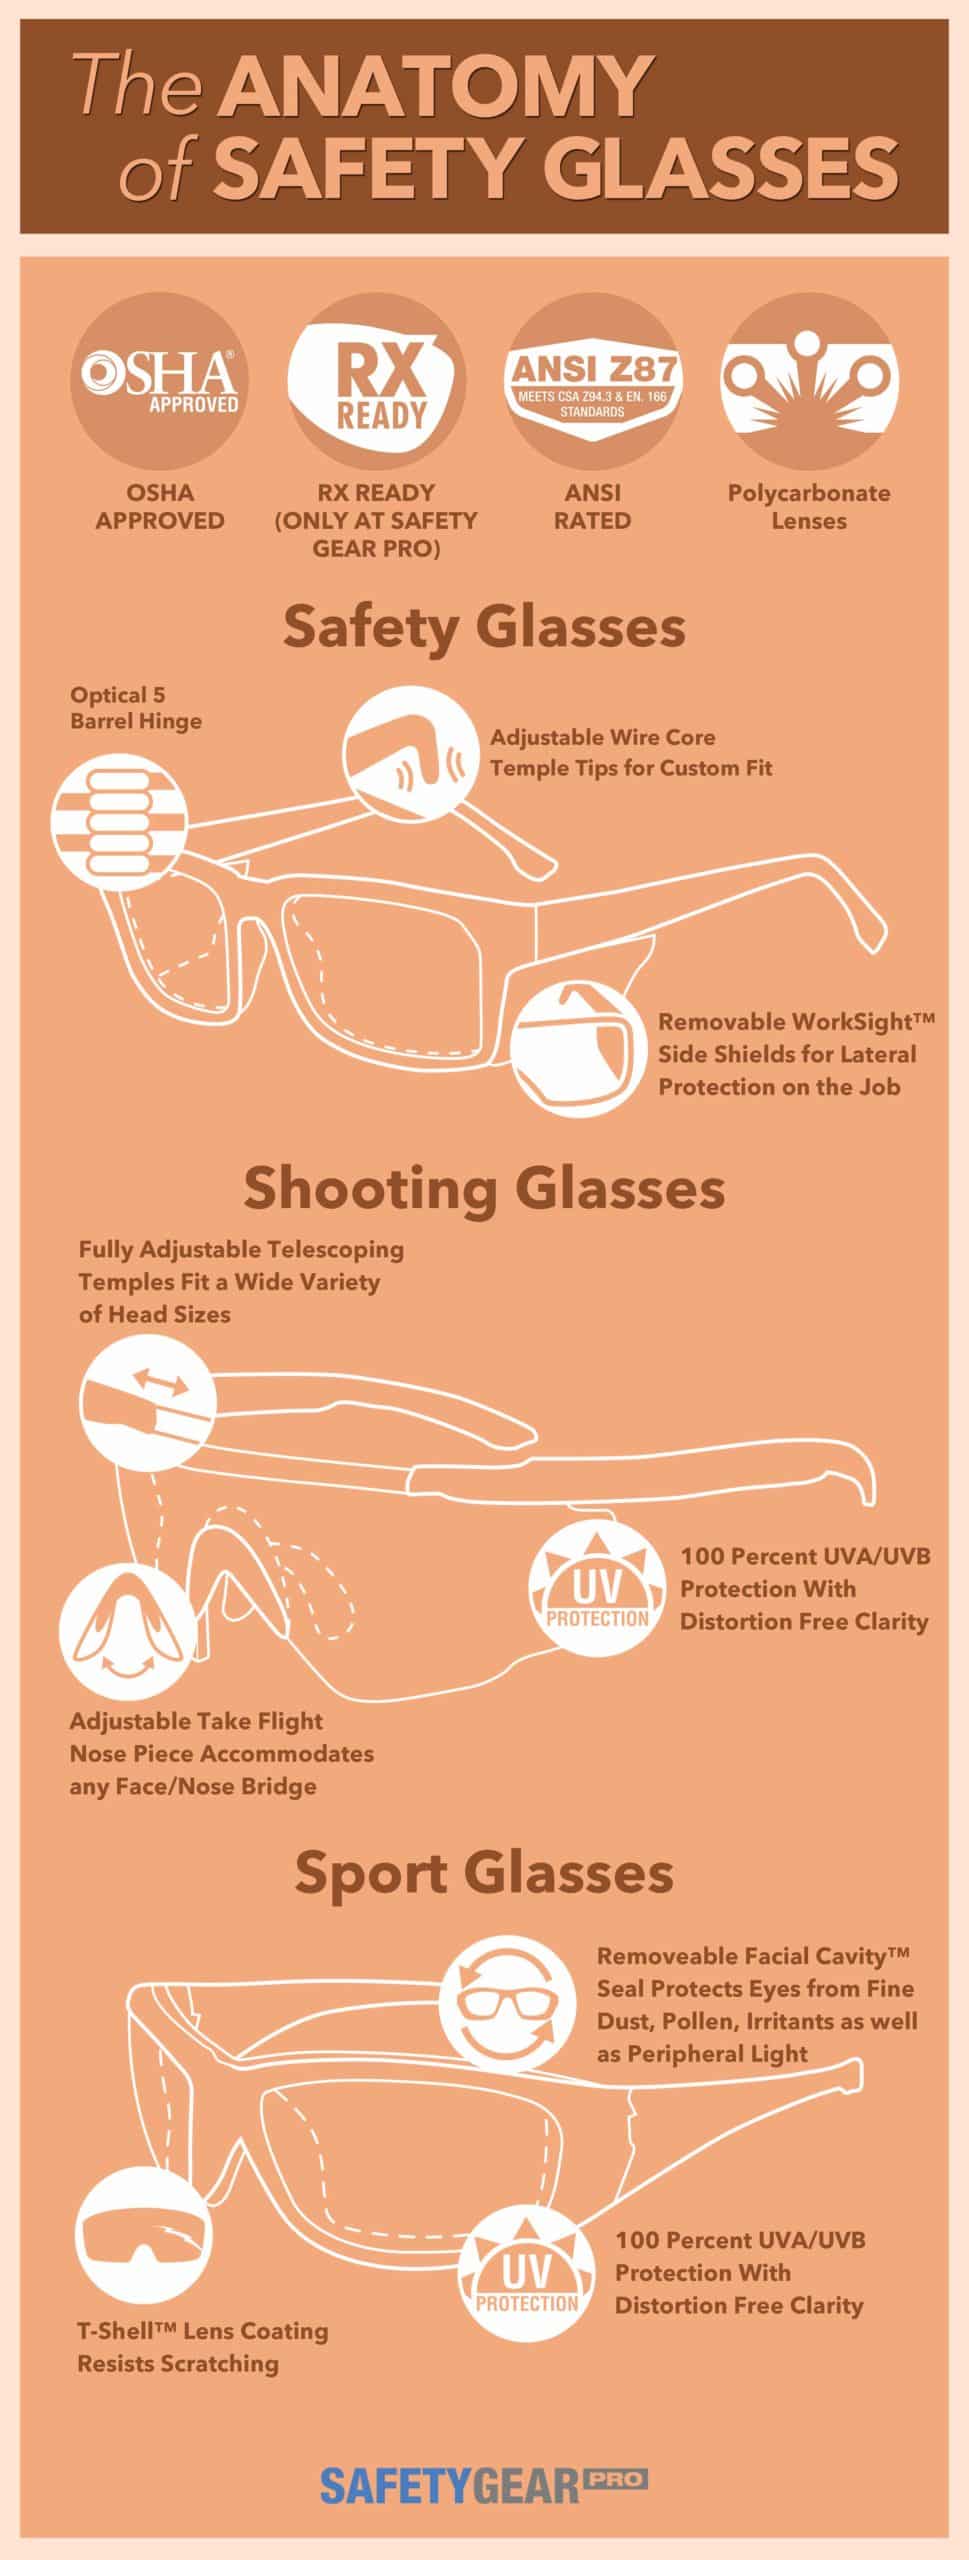 The Anatomy of Safety Glasses Infographic